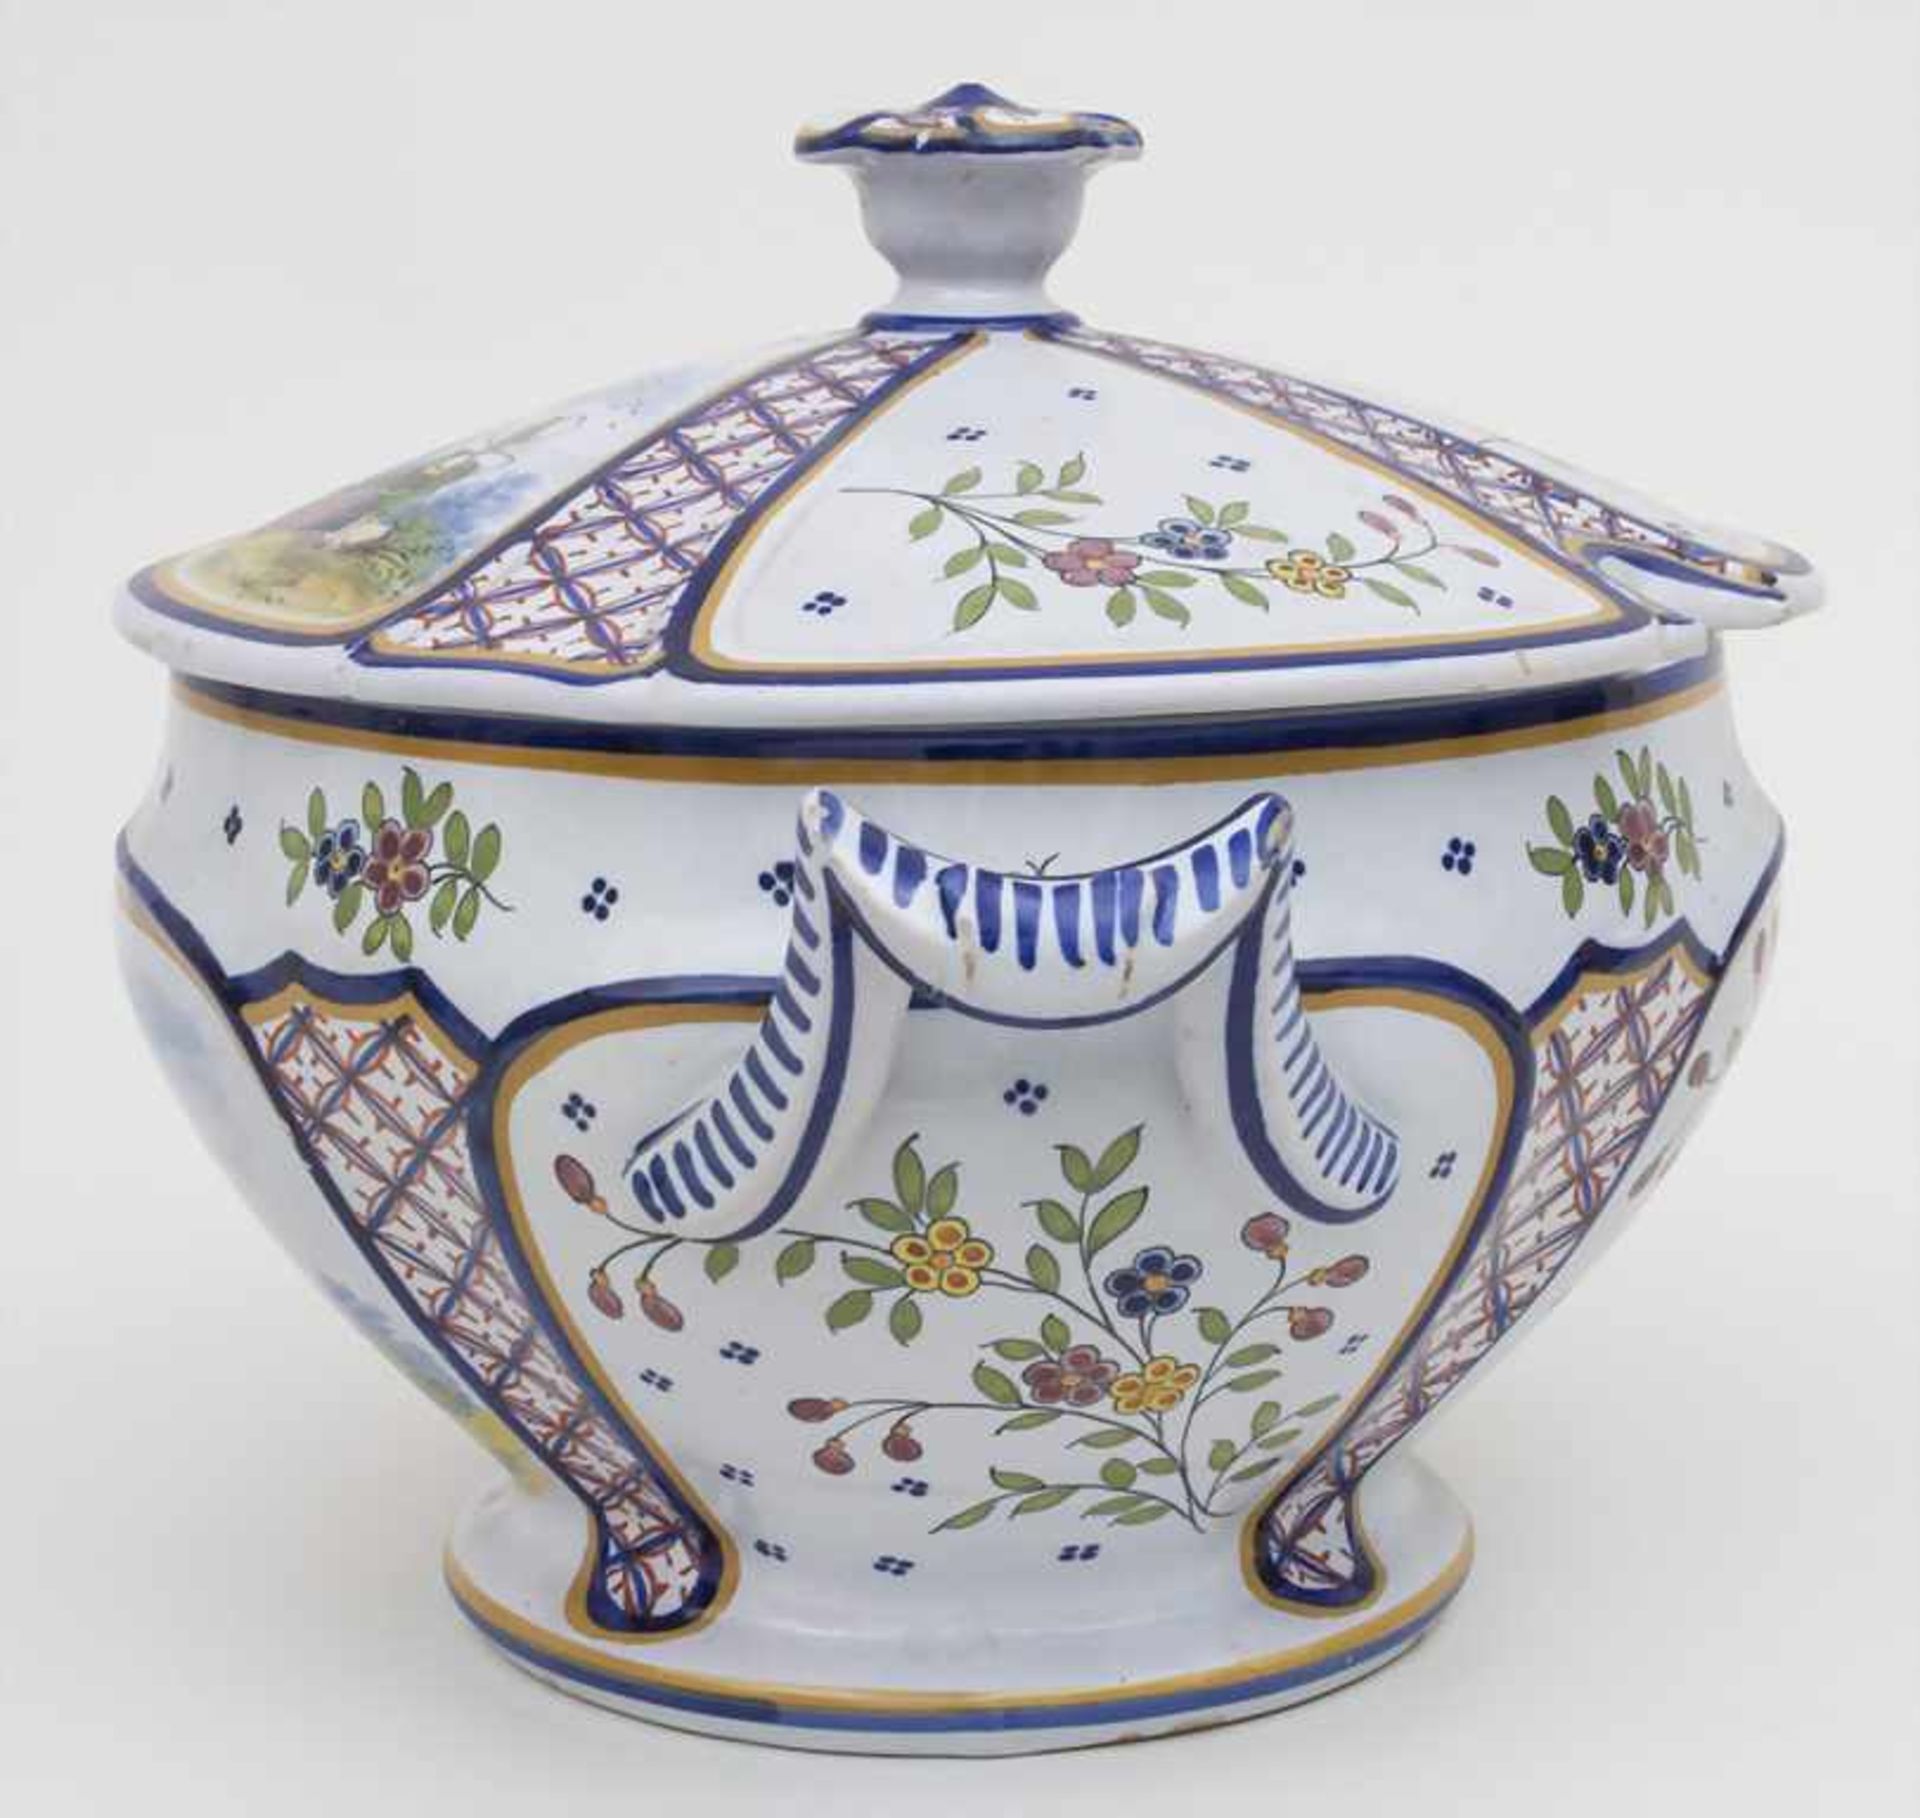 Fayence Deckelterrine / A faience tureen, Quimper, Bretagne, Frankreich, 20. Jh.Material: Fayence, - Image 2 of 9